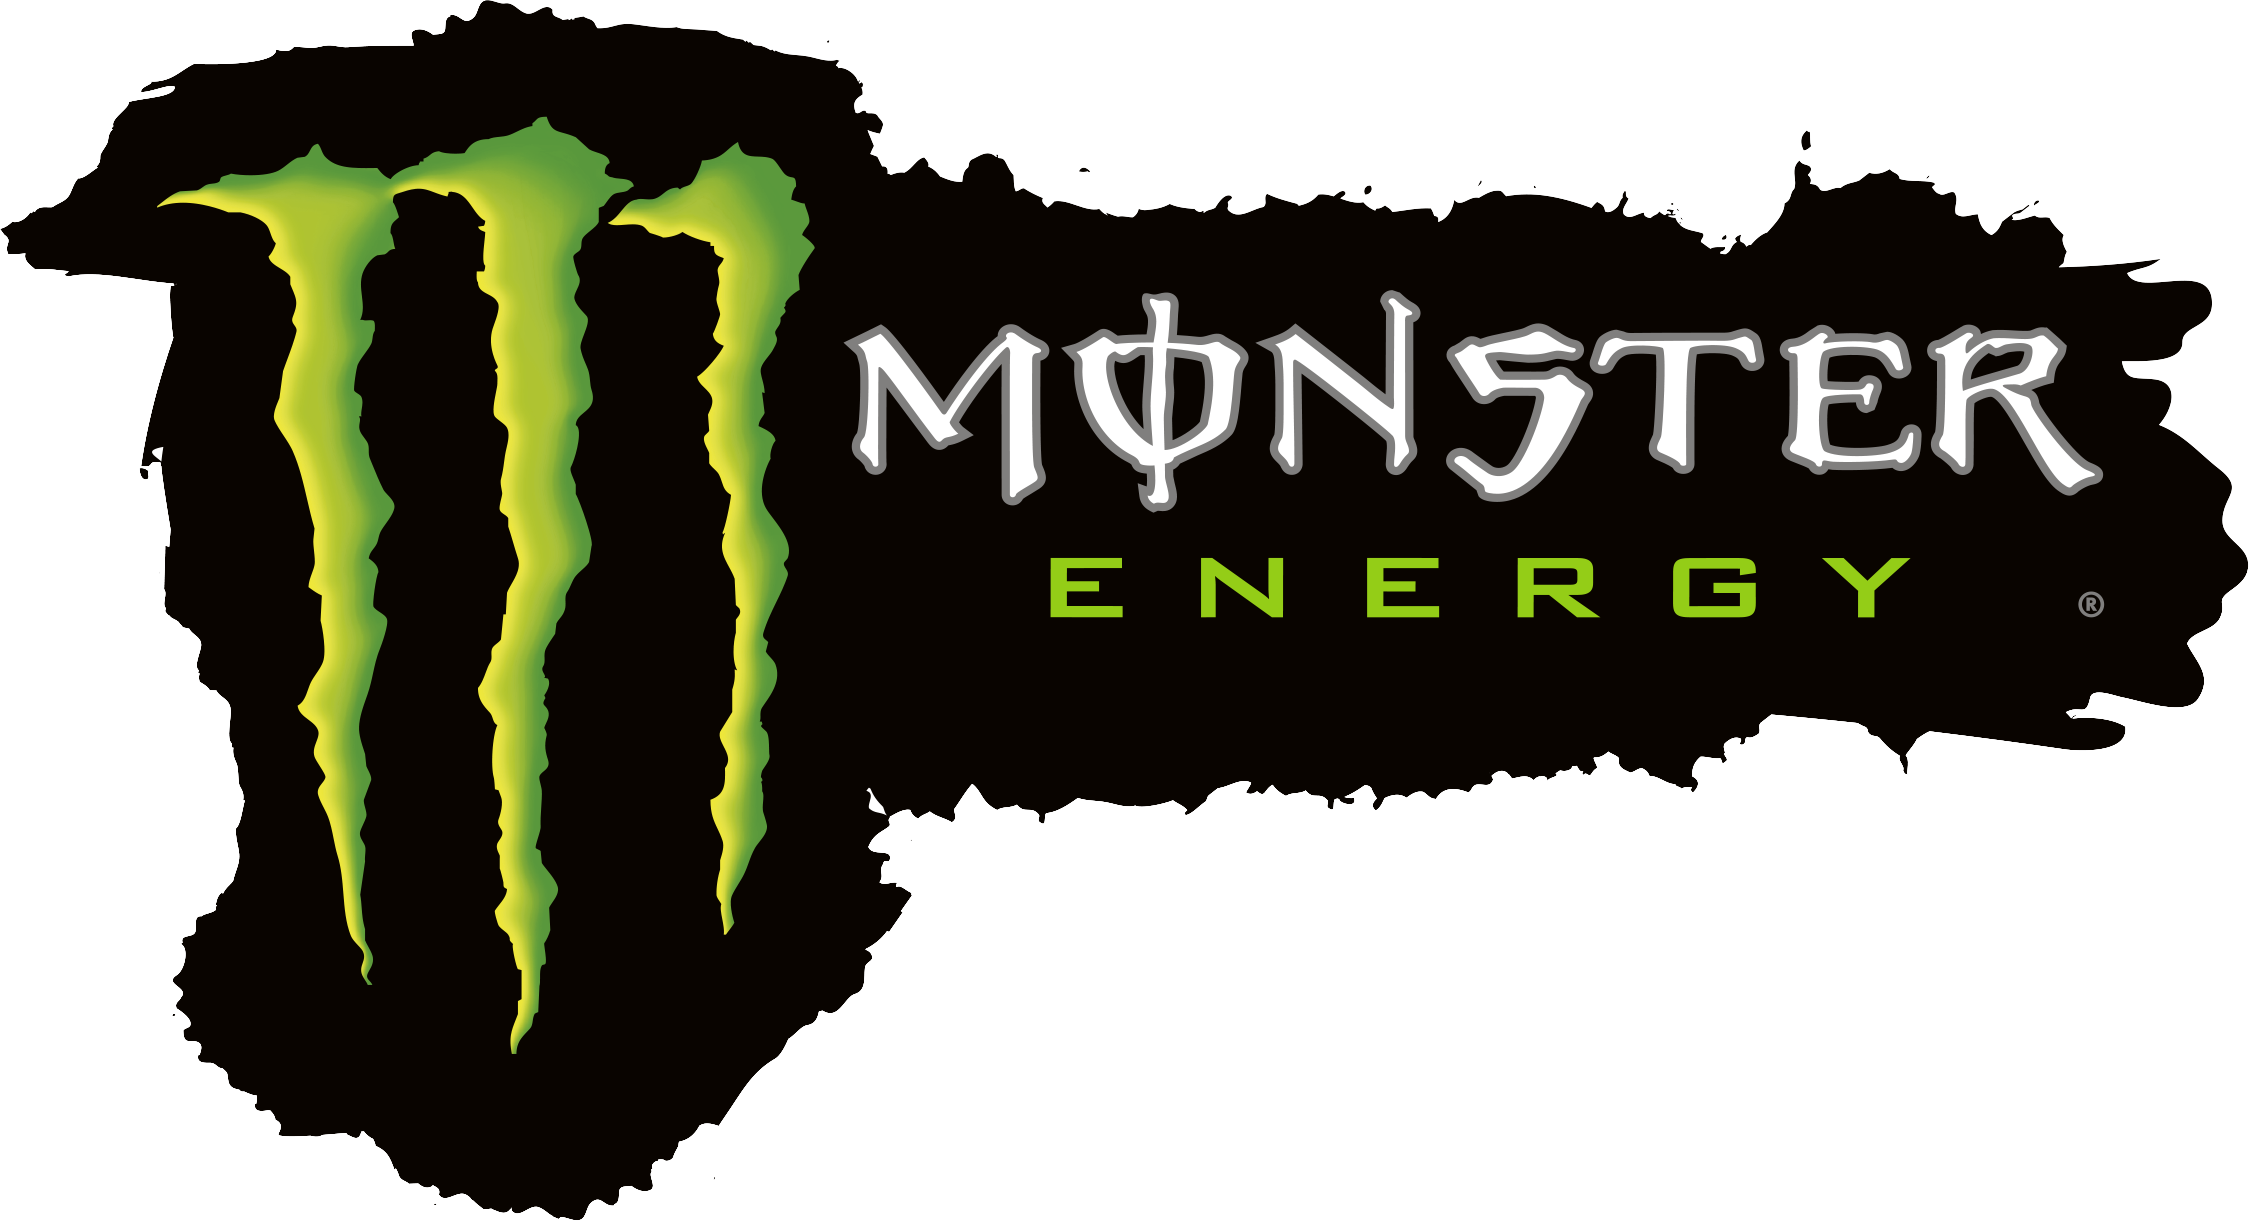 293238_monster-energy-logo-png.png